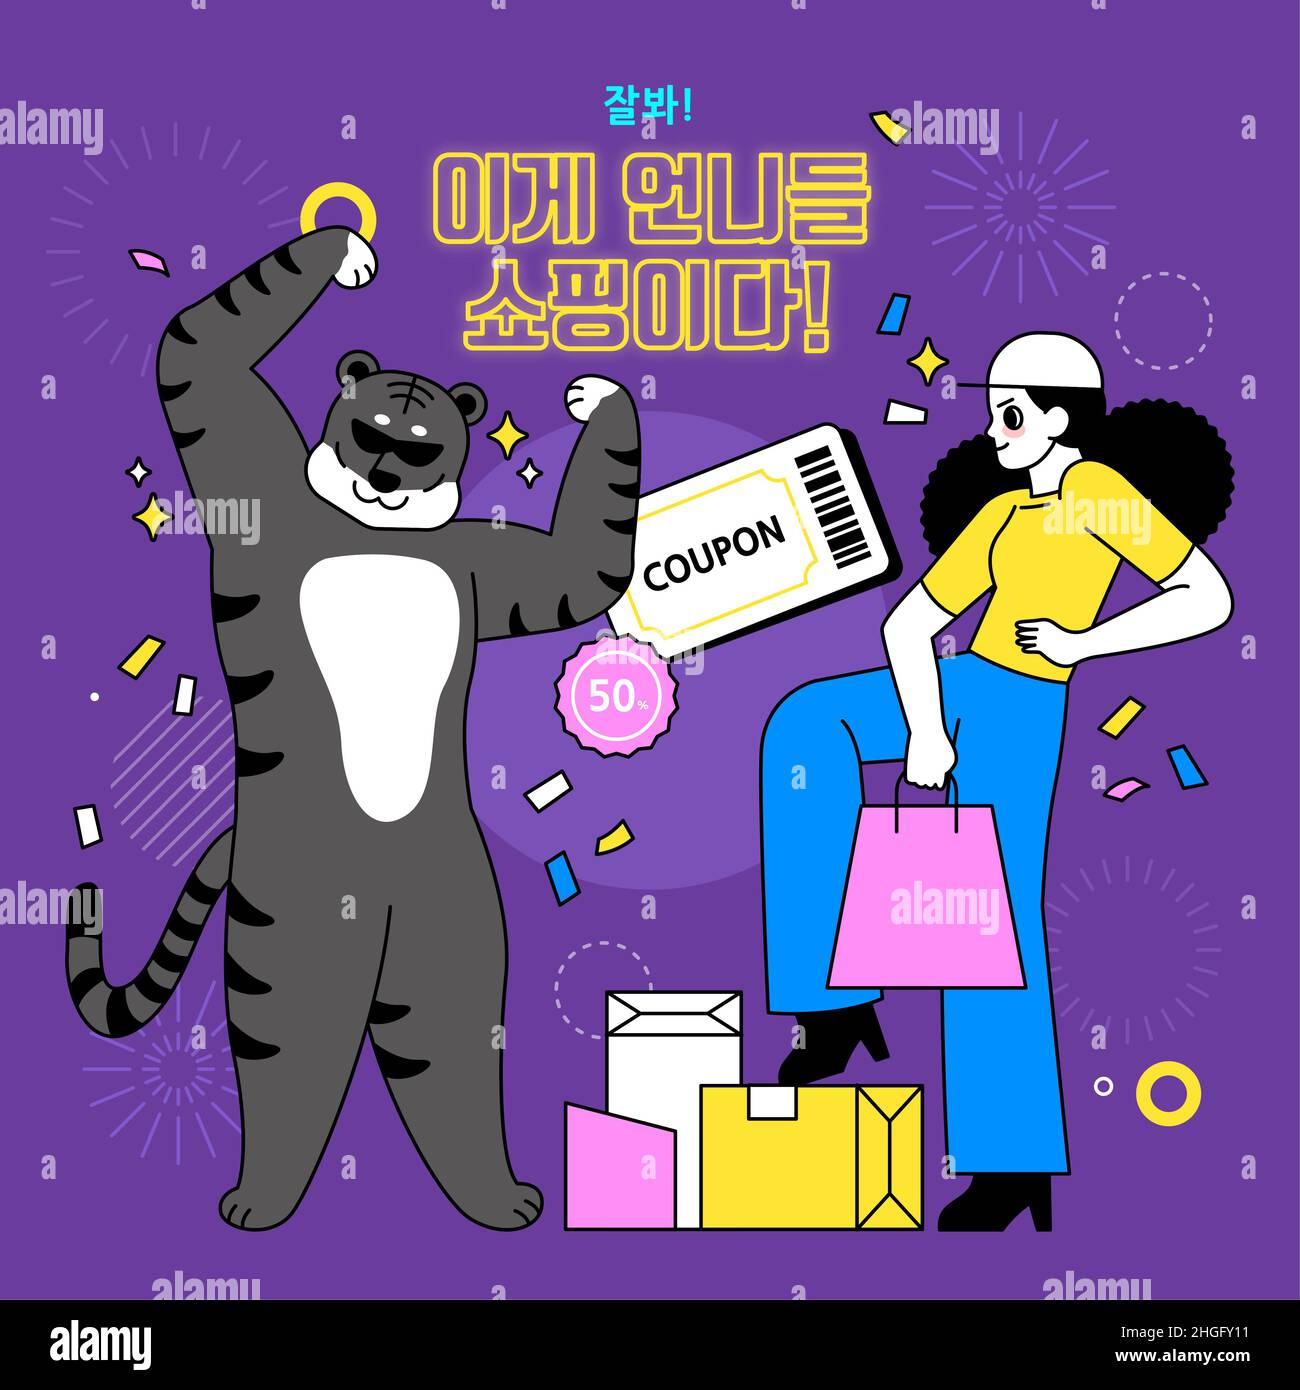 tiger character with woman dancer illustration, shopping event concept Stock Photo